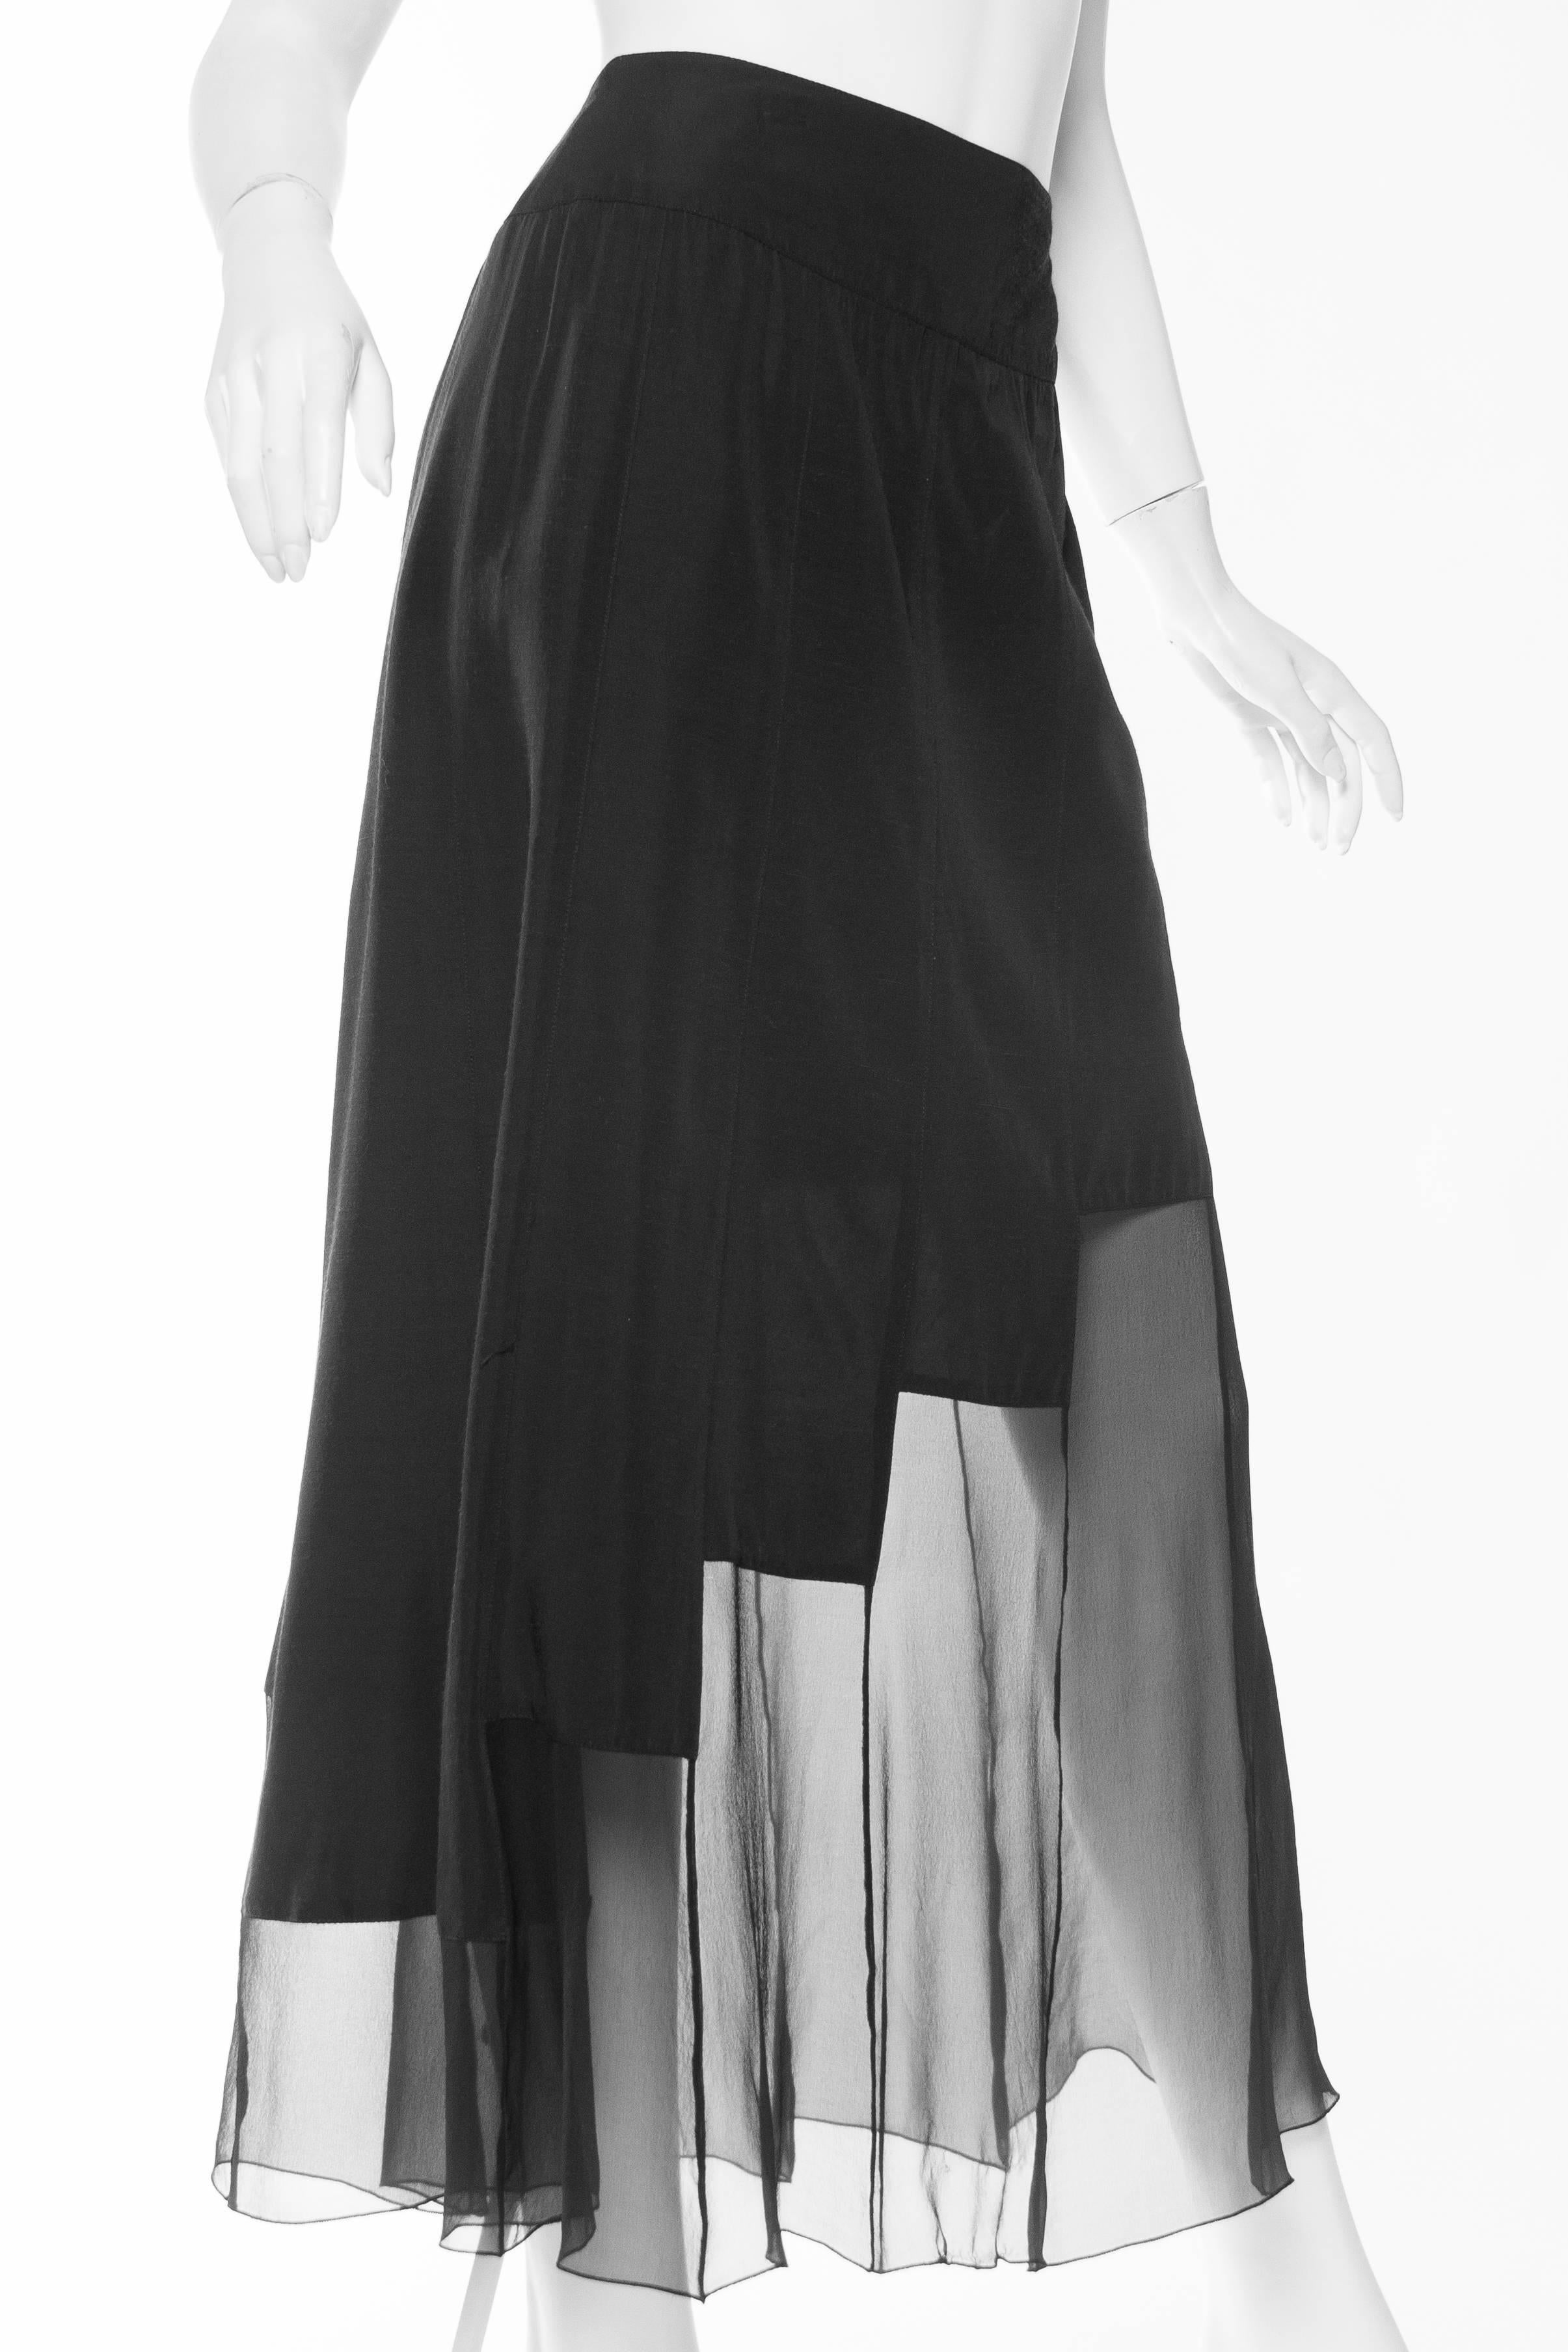 1980s Karl Lagerfeld Sheer Memphis Deco Skirt In Excellent Condition In New York, NY